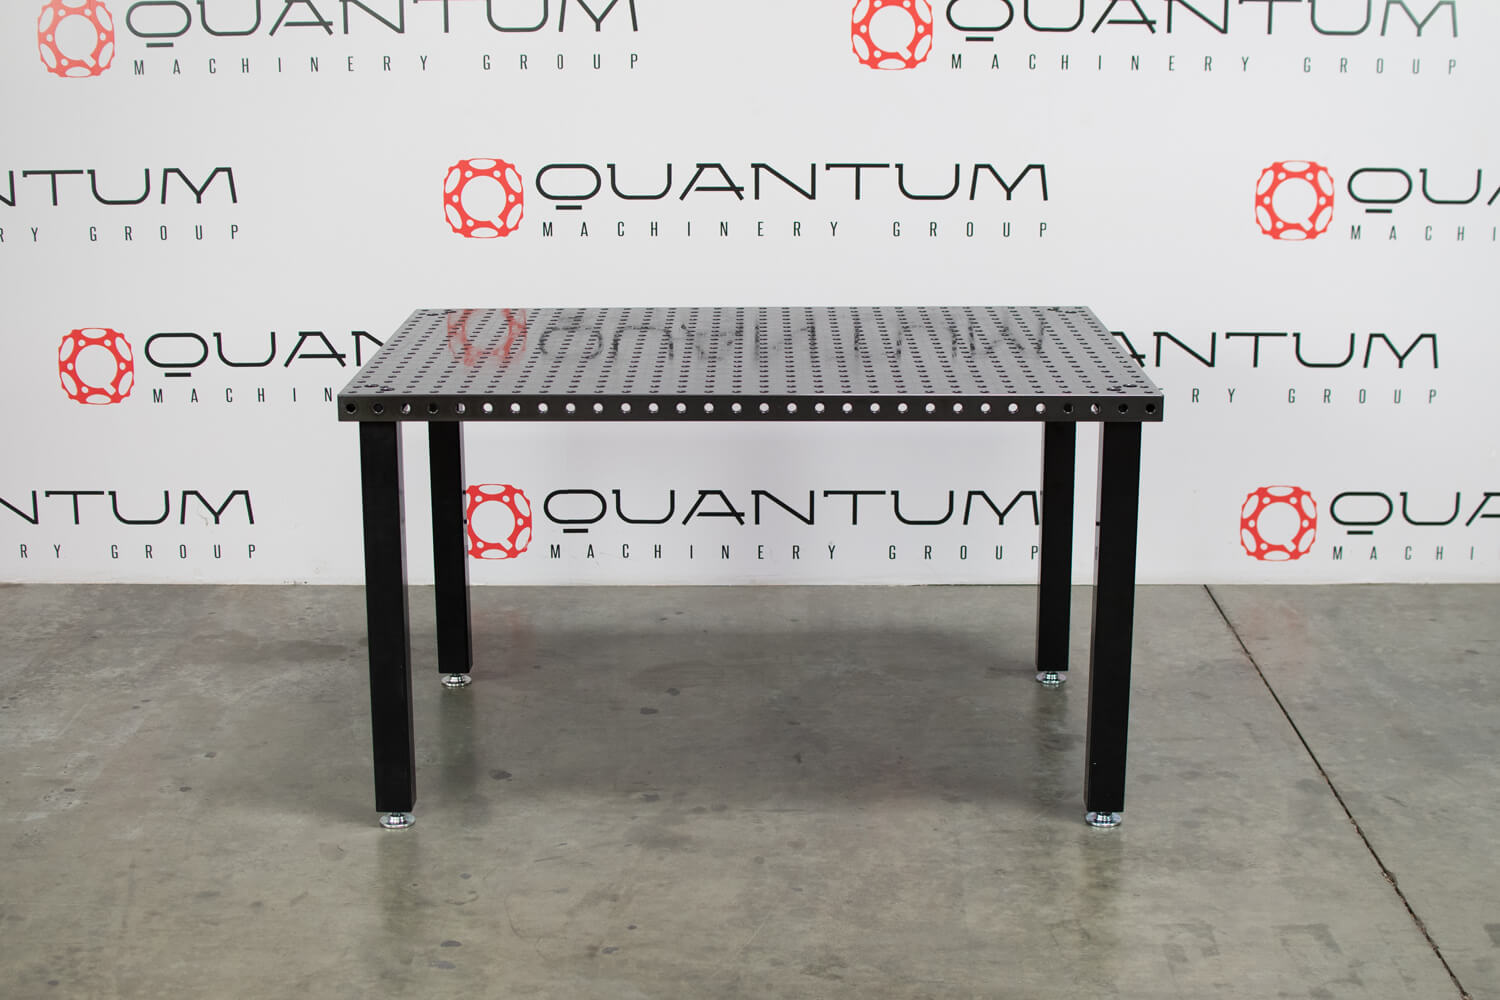 System 16 1500x1000mm (59"x39") Siegmund "BASIC" Welding Table (Item No. 4-161035.P) - Siegmund Welding Tables and Fixtures USA - A Division of Quantum Machinery Group